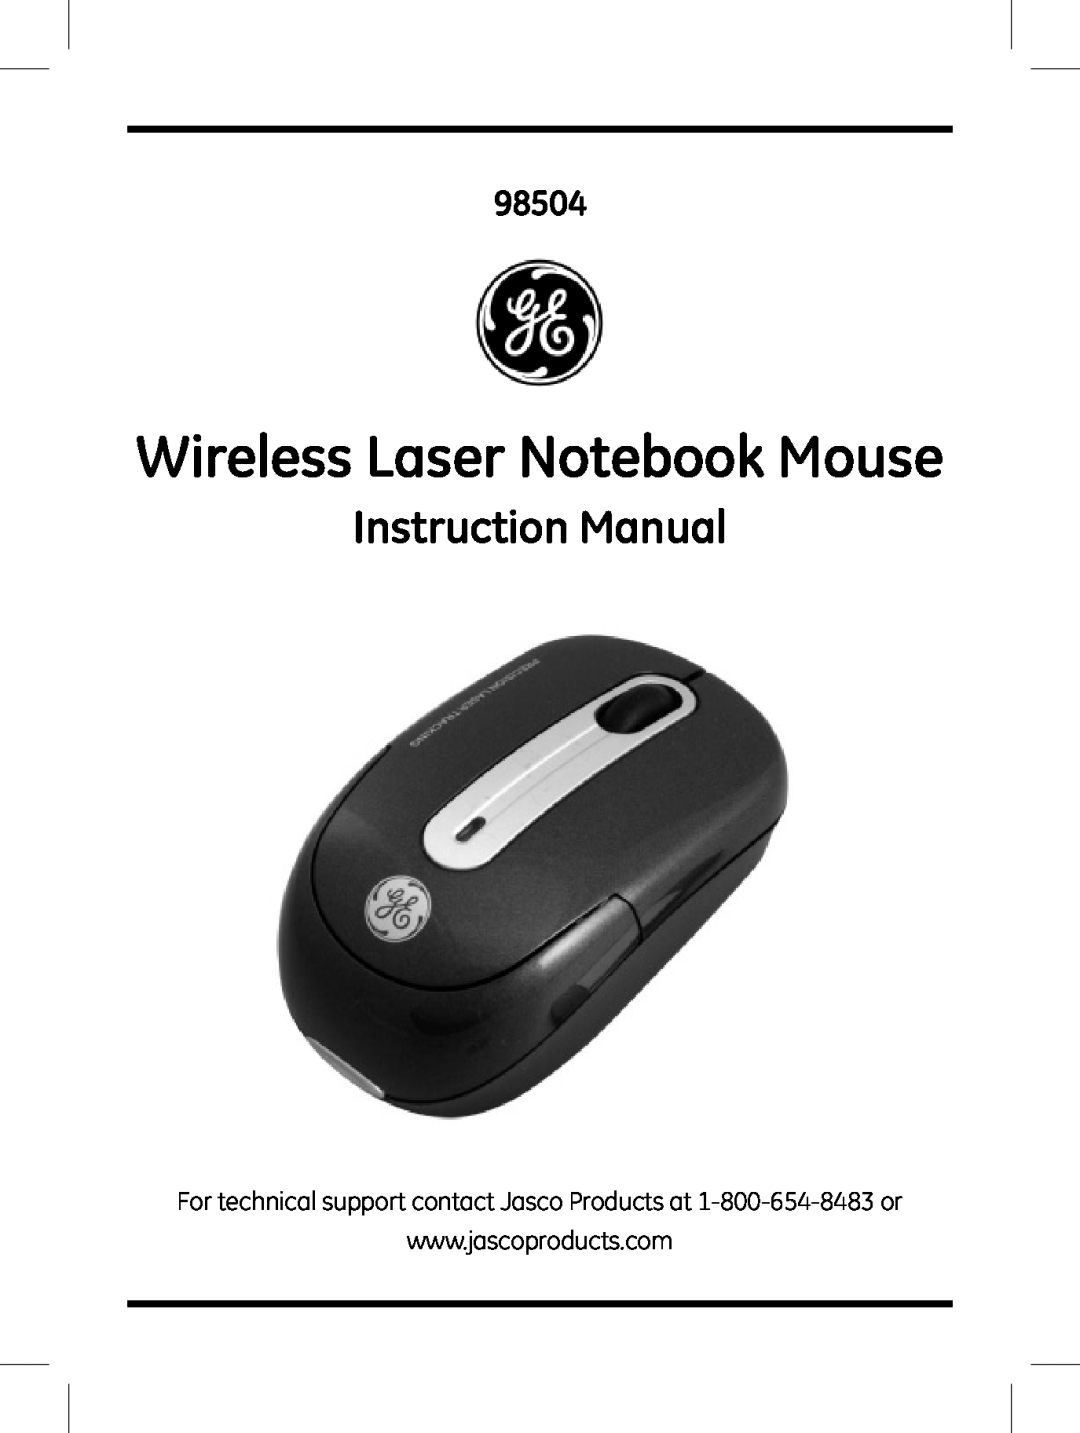 GE 98504 instruction manual Wireless Laser Notebook Mouse, Instruction Manual 